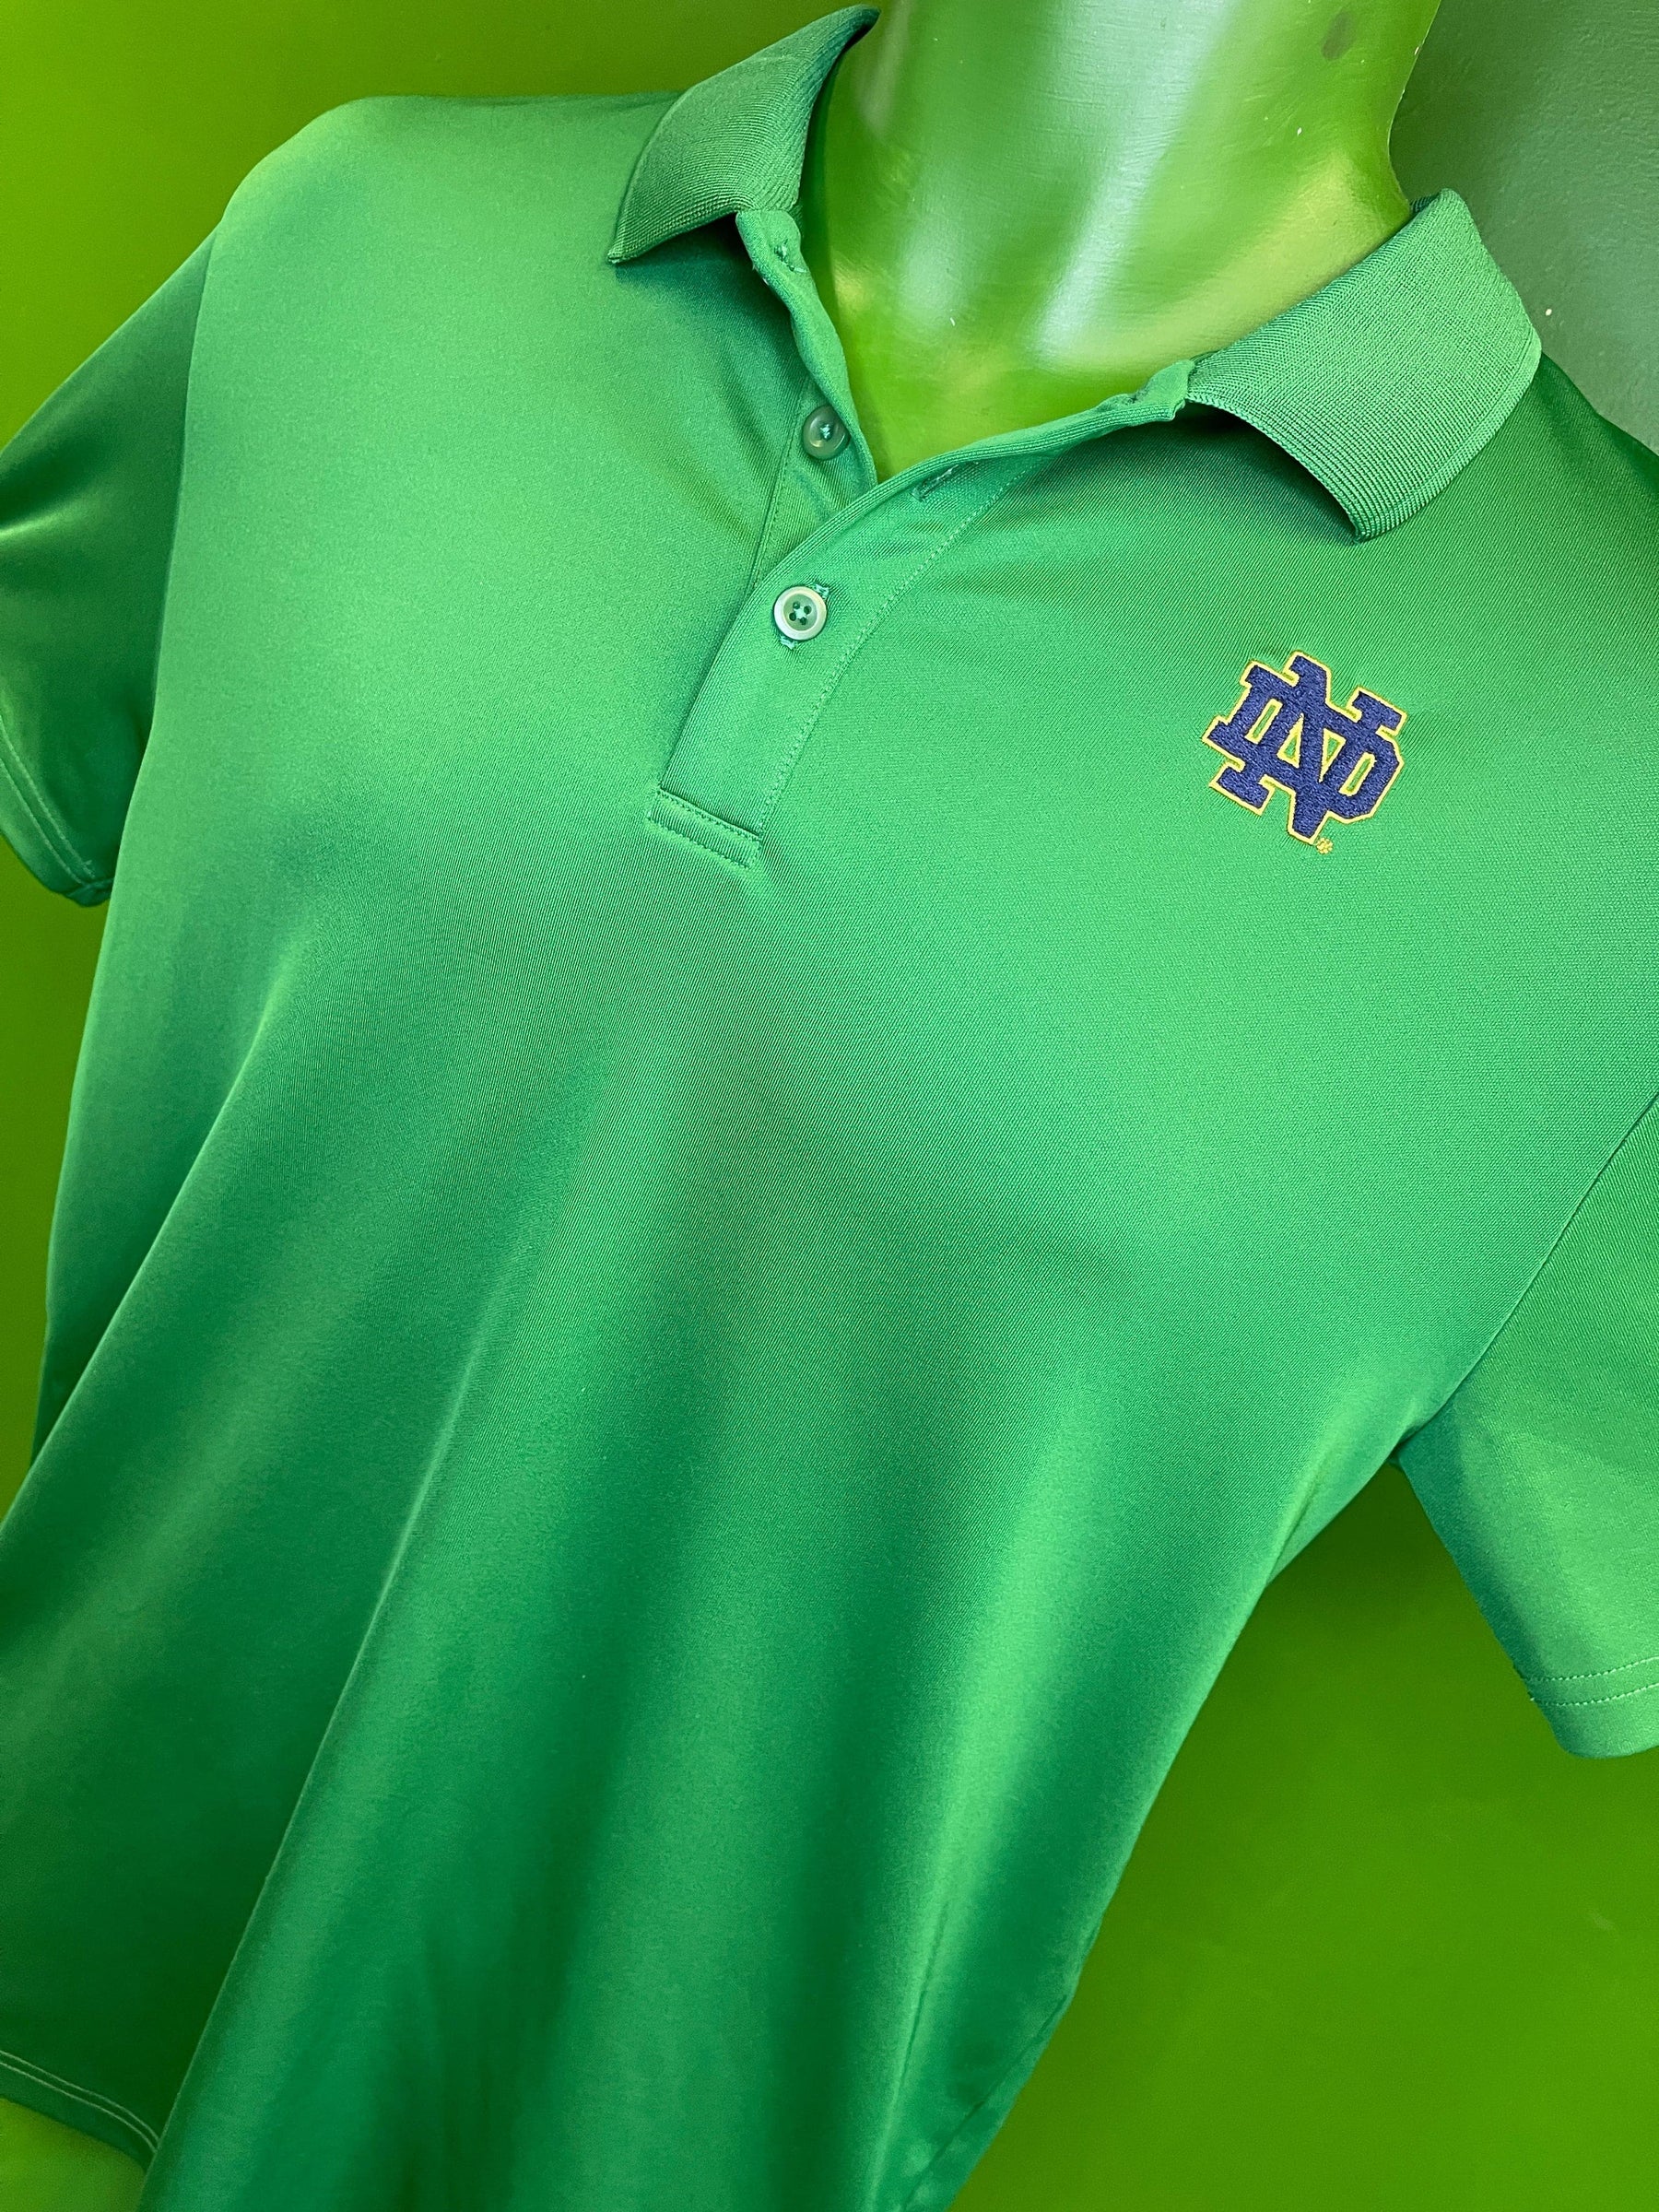 NCAA Notre Dame Fighting Irish Under Armour Golf Polo Shirt Youth X-Large 18-20